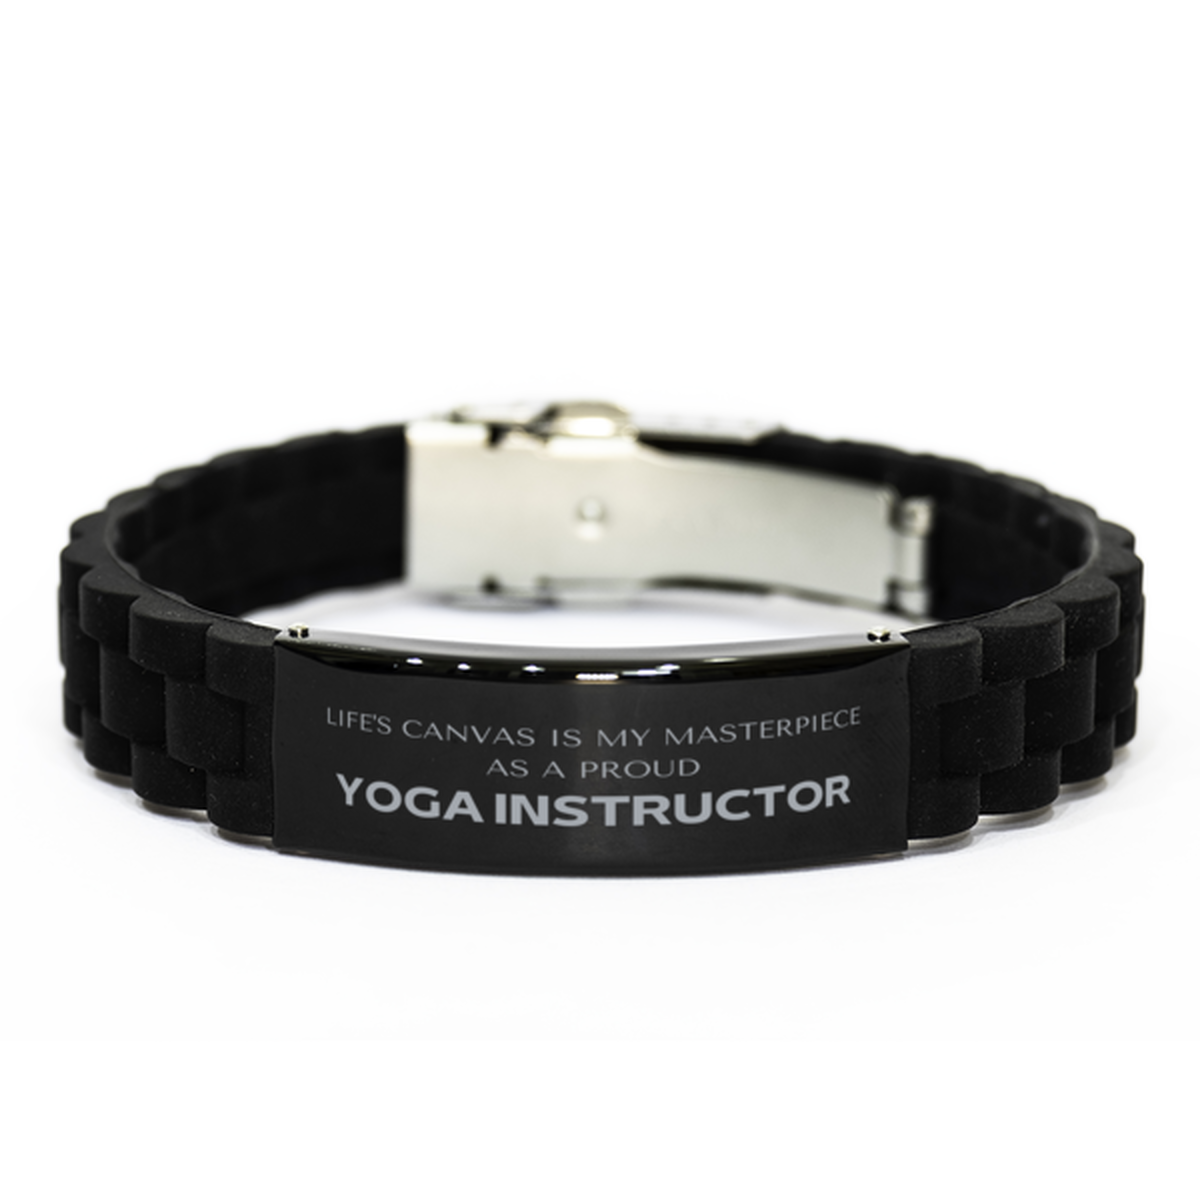 Proud Yoga Instructor Gifts, Life's canvas is my masterpiece, Epic Birthday Christmas Unique Black Glidelock Clasp Bracelet For Yoga Instructor, Coworkers, Men, Women, Friends